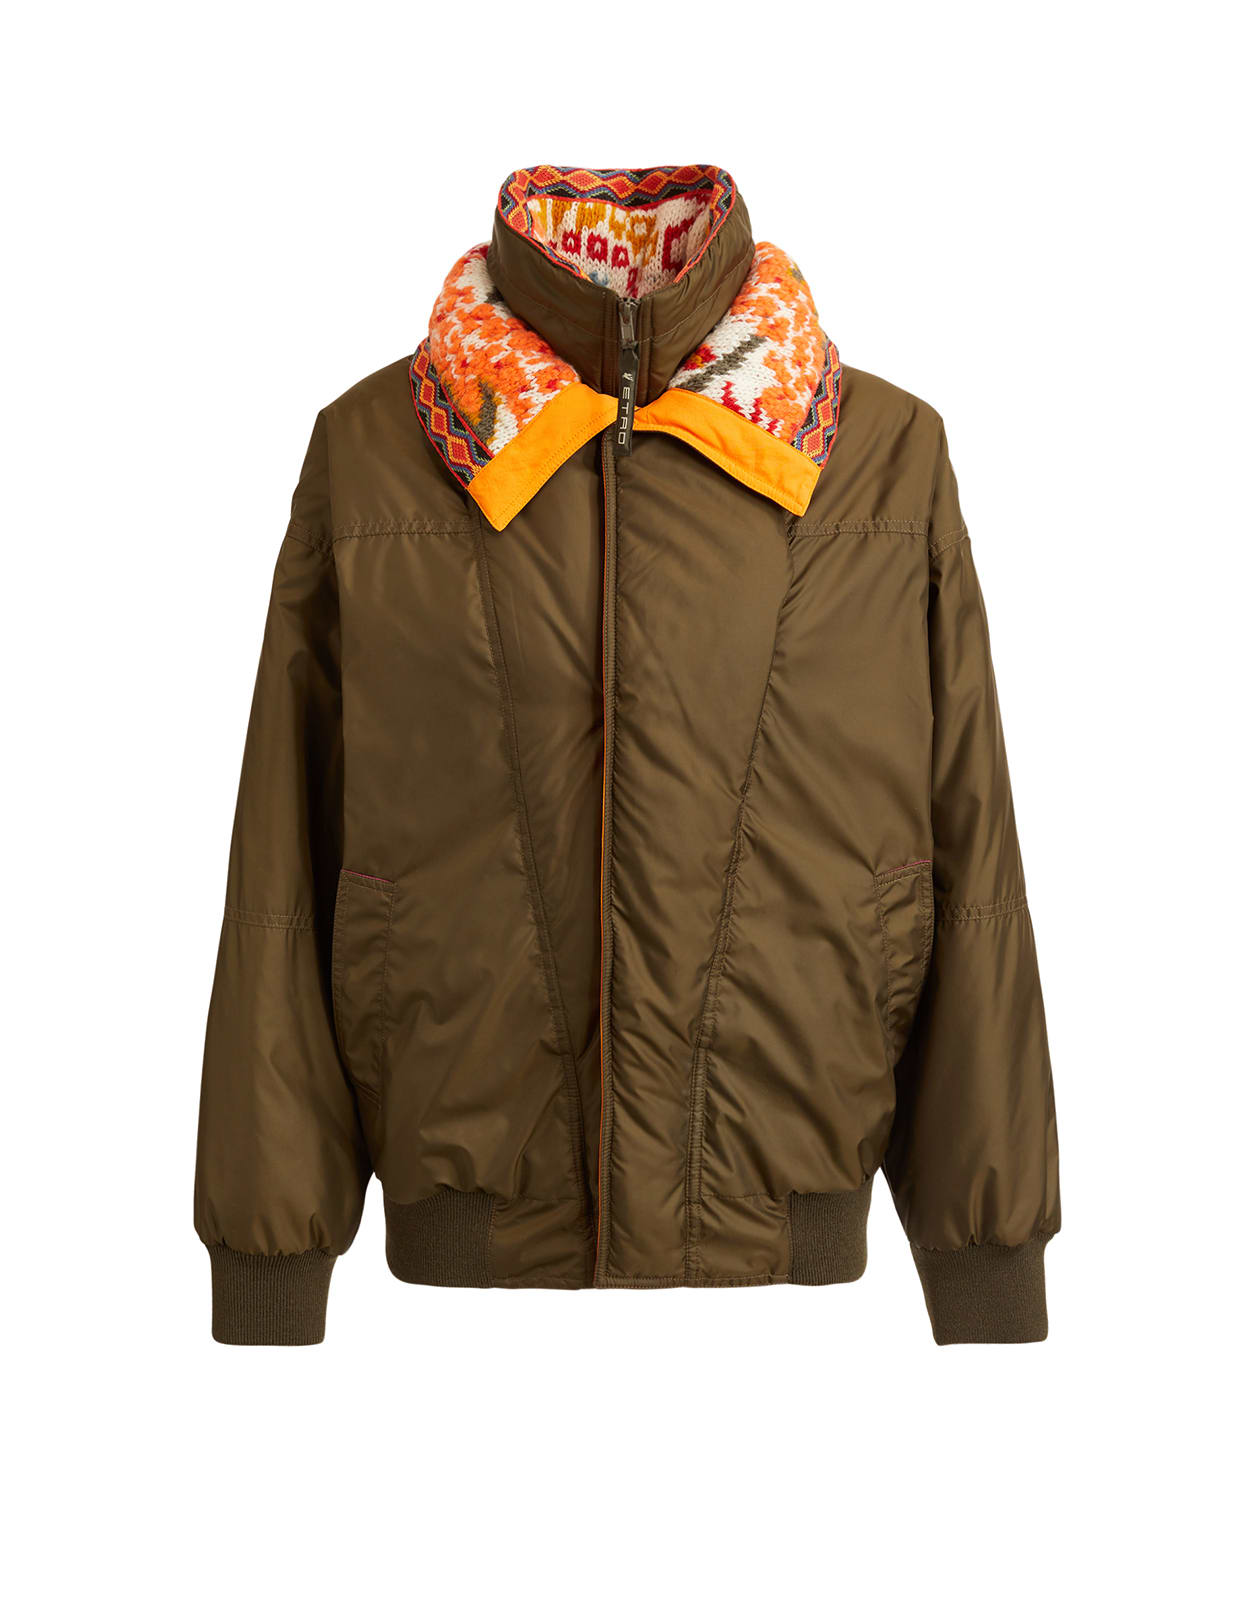 Etro Woman Military Green Jacket With Multicolored Details